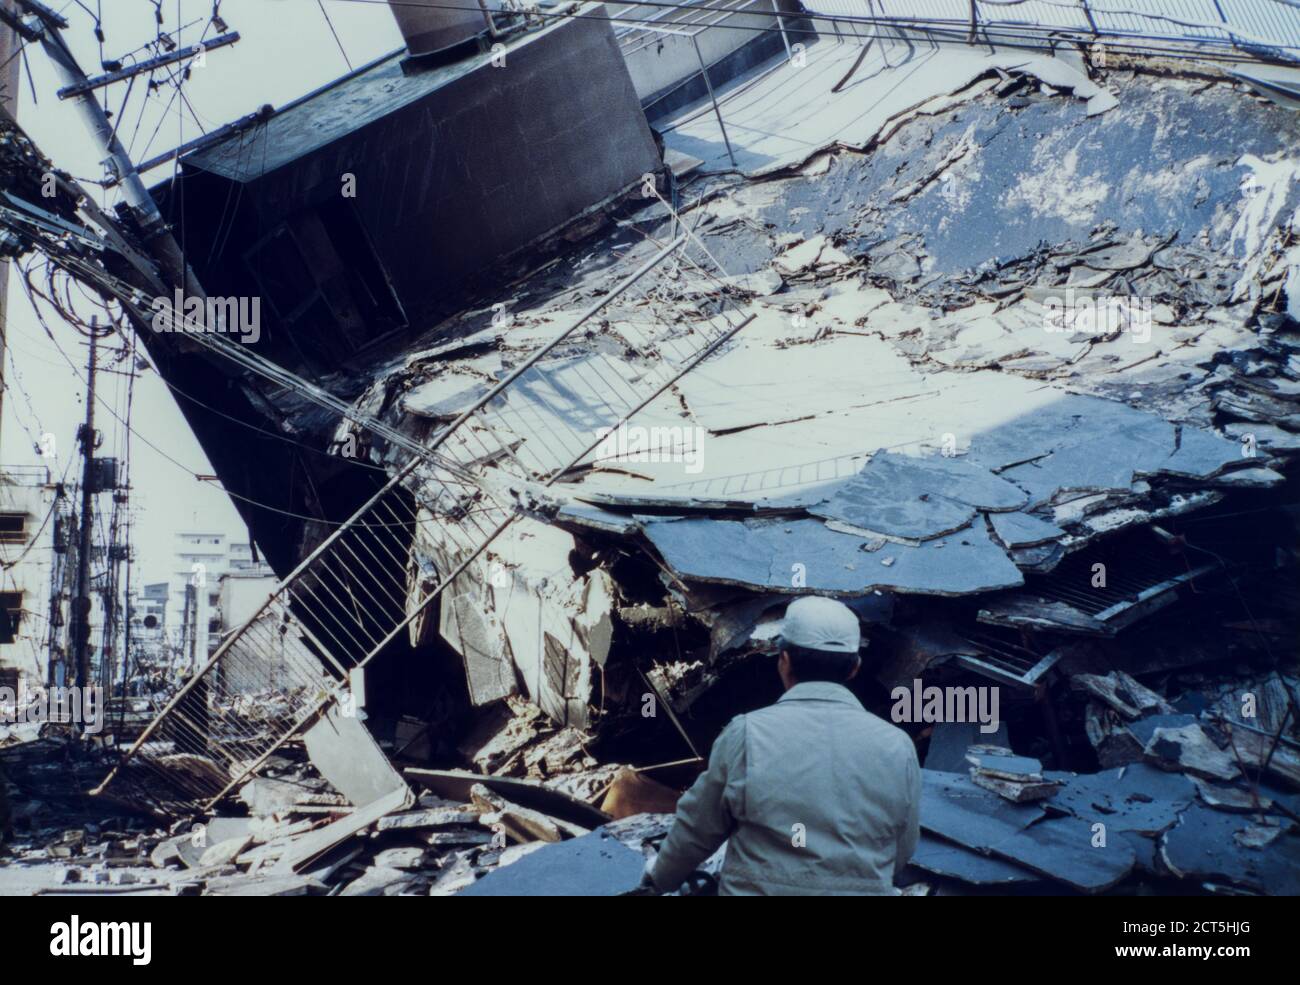 Man stops and looks upon collapsed building from the damage caused by the 1995 Great Hanshin Earthquake in Kobe, Japan Stock Photo